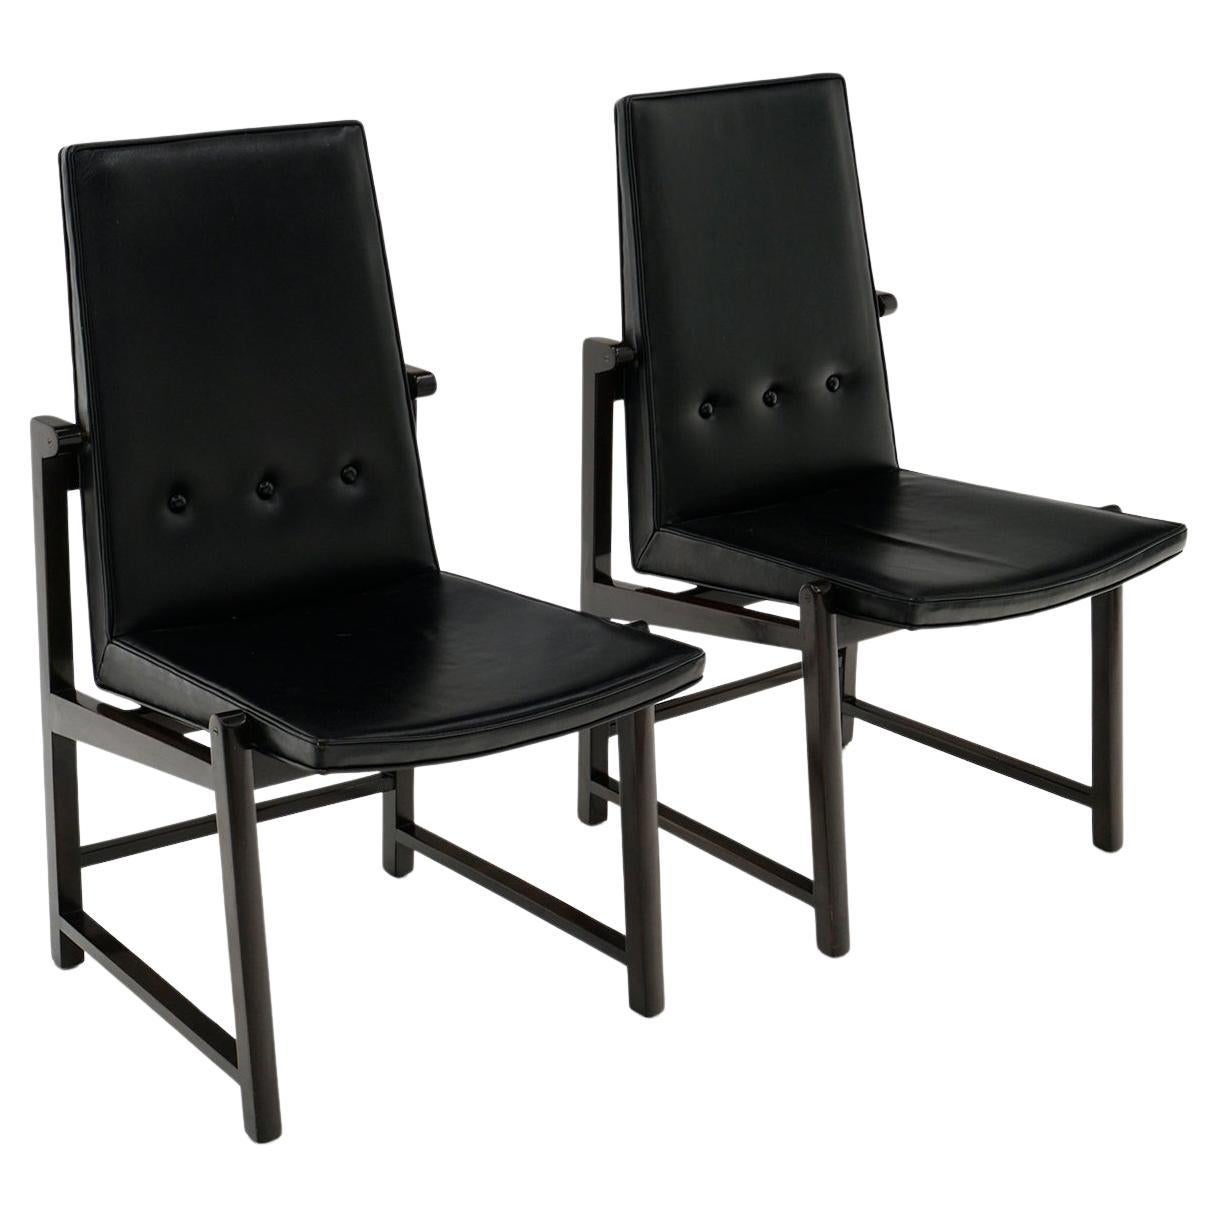 Rare Pair Dunbar Dining Chairs in Original Black Leather, Mahogany Frames, Signed